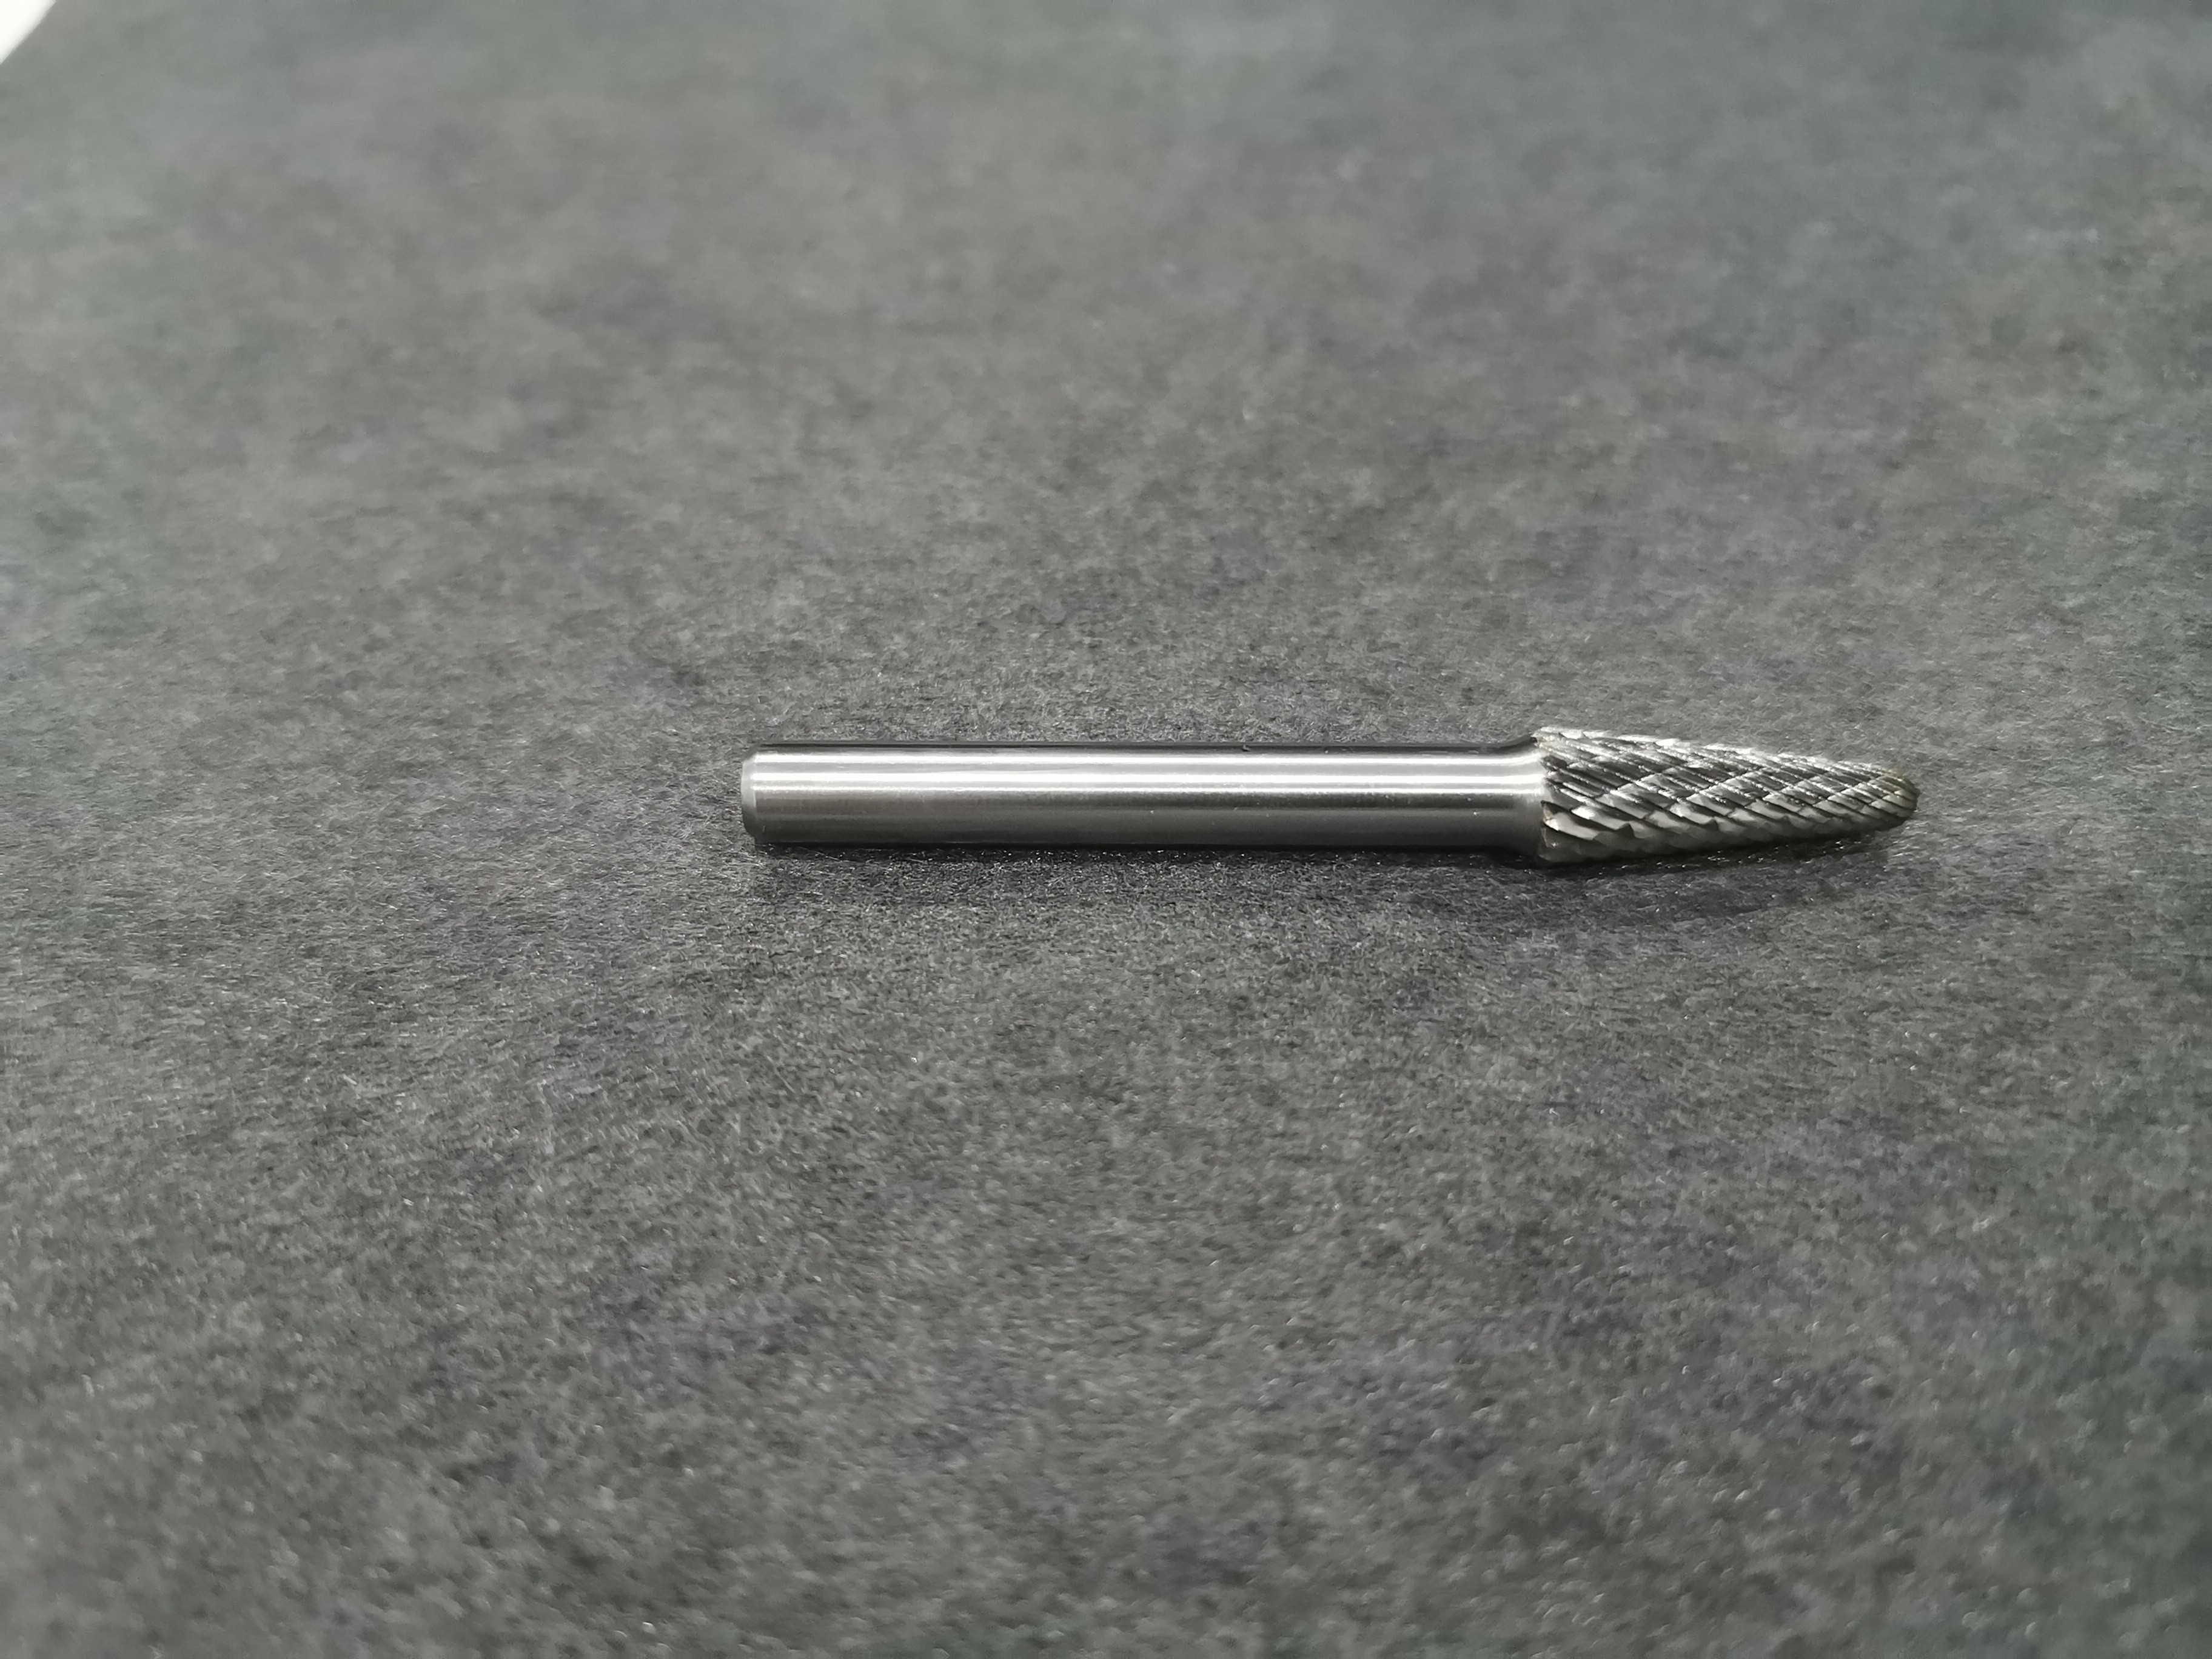  10MM-12MM BURR DIAMETER OF TUNGSTEN ROTARY CARBIDE BURRS Manufactures